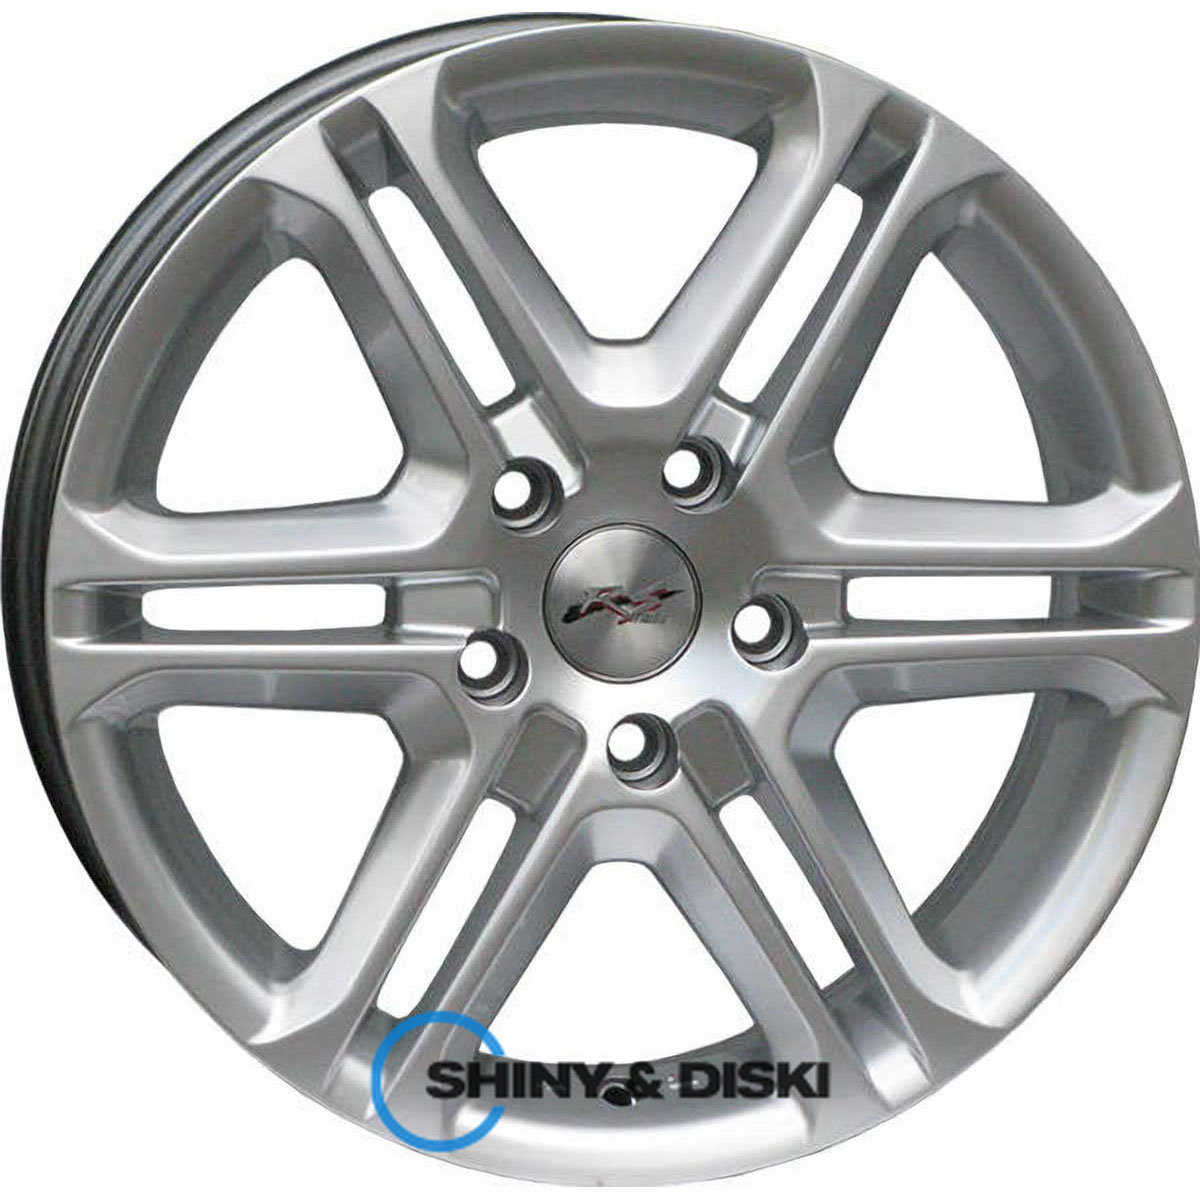 rs tuning 789 hs r15 w6.5 pcd5x114.3 et38 dia67.1